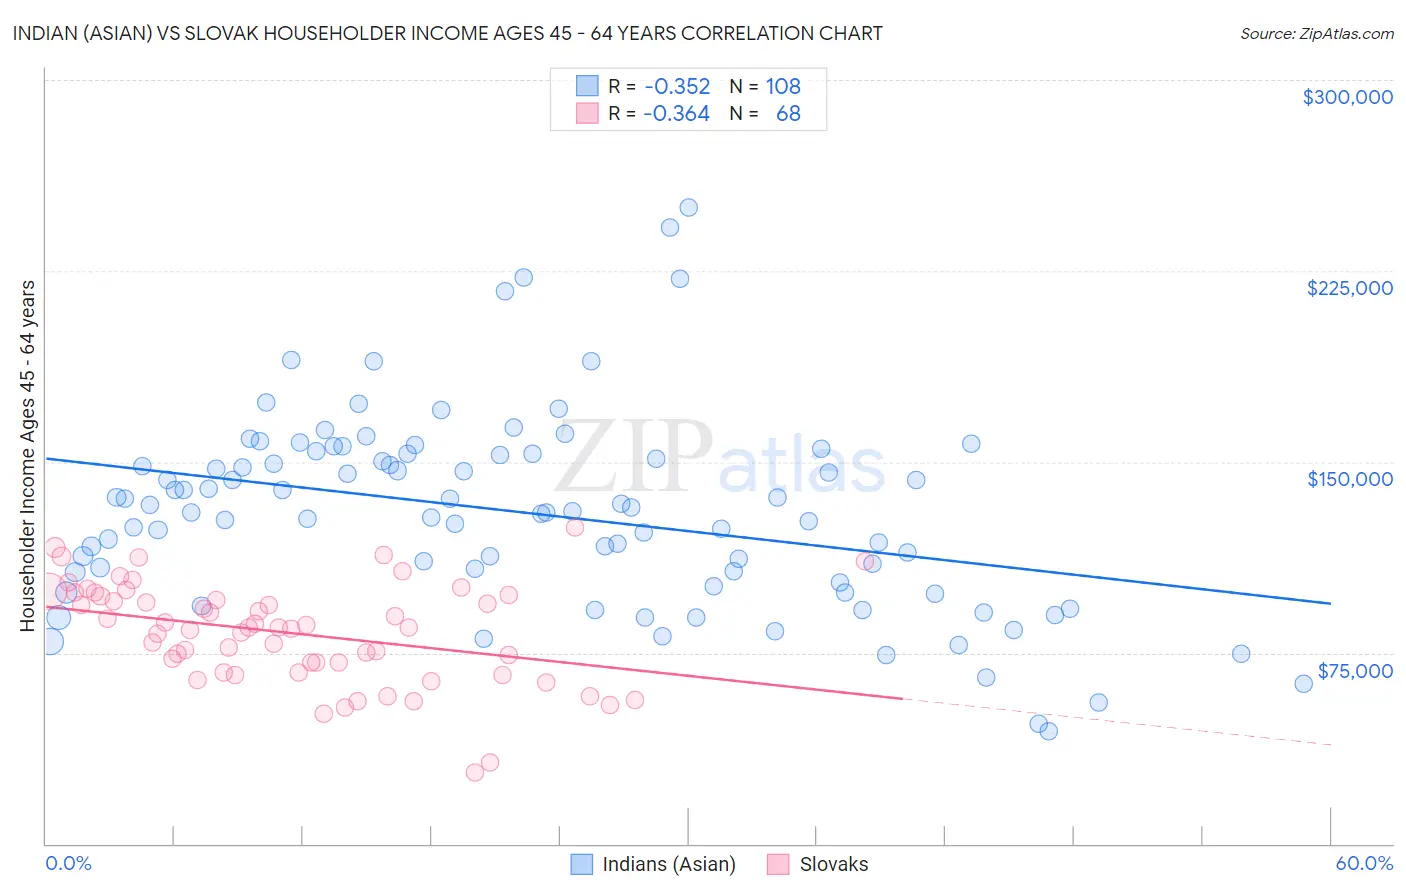 Indian (Asian) vs Slovak Householder Income Ages 45 - 64 years